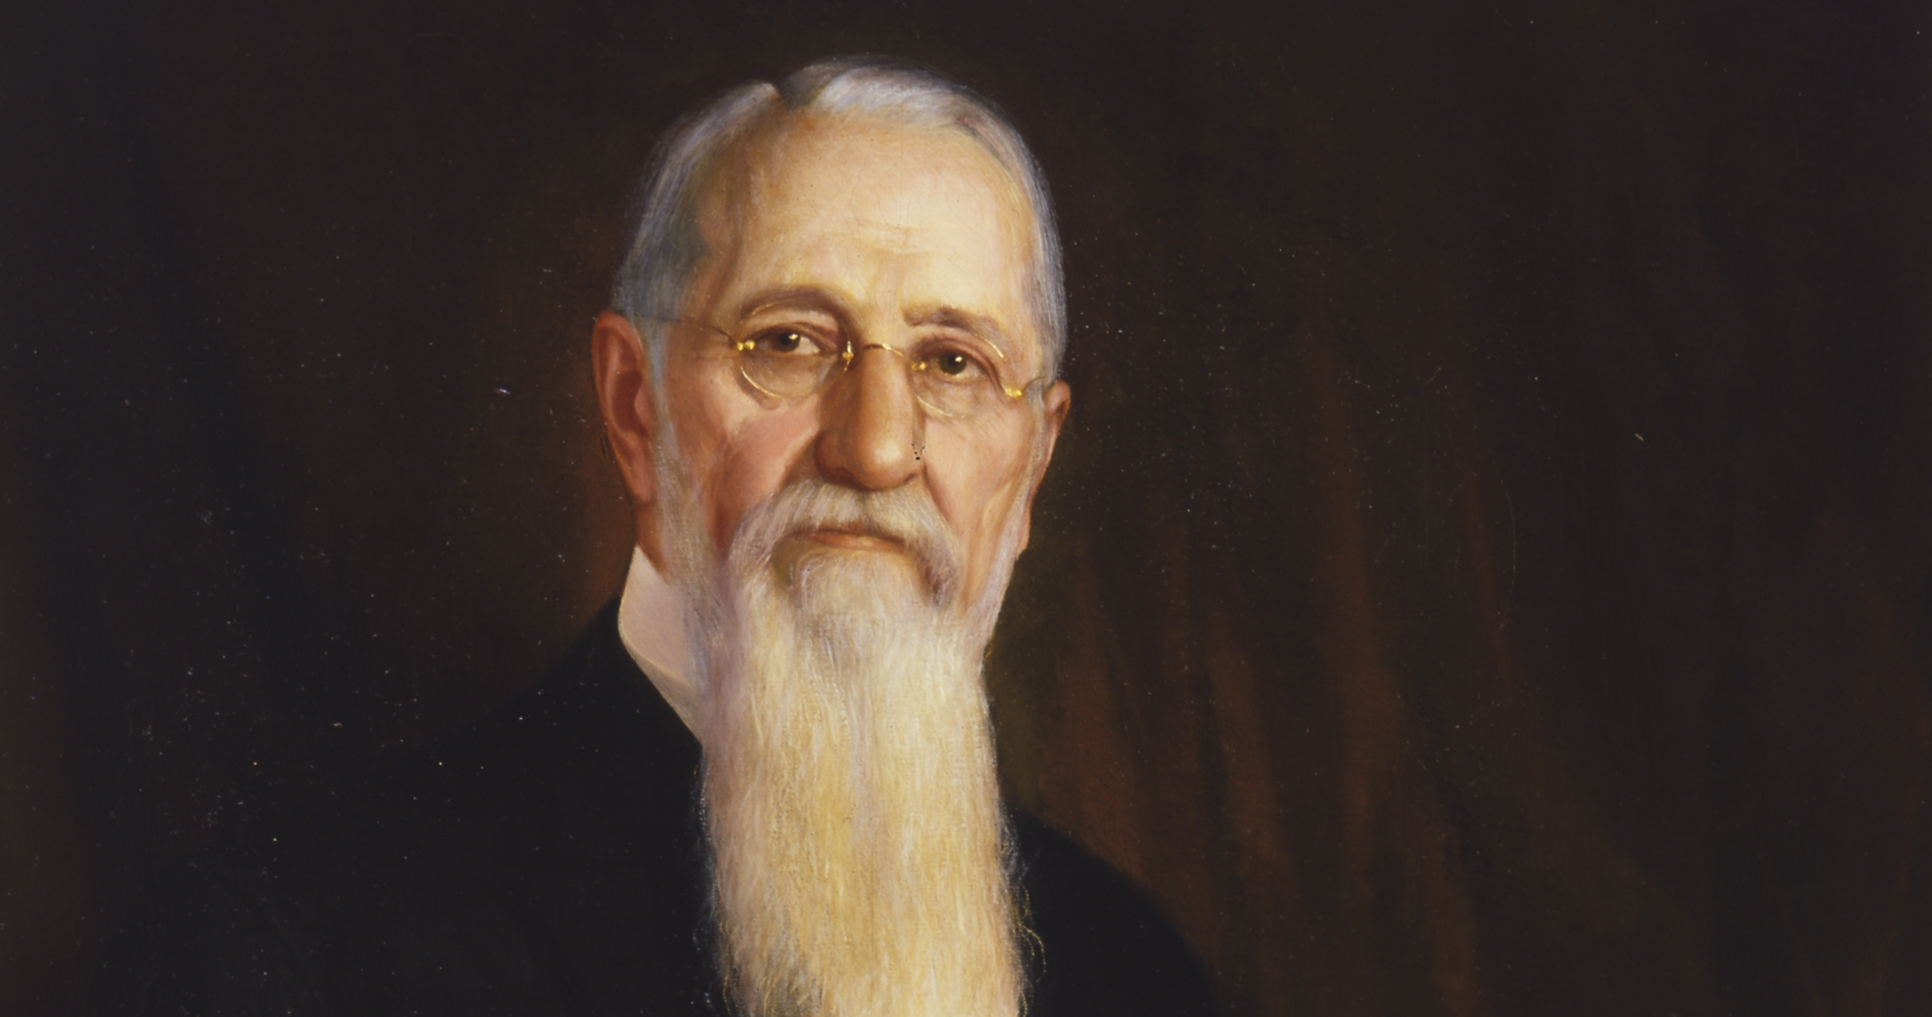 Painting depicts a portrait of a mature Joseph F. Smith who saw eternal worlds in vision.